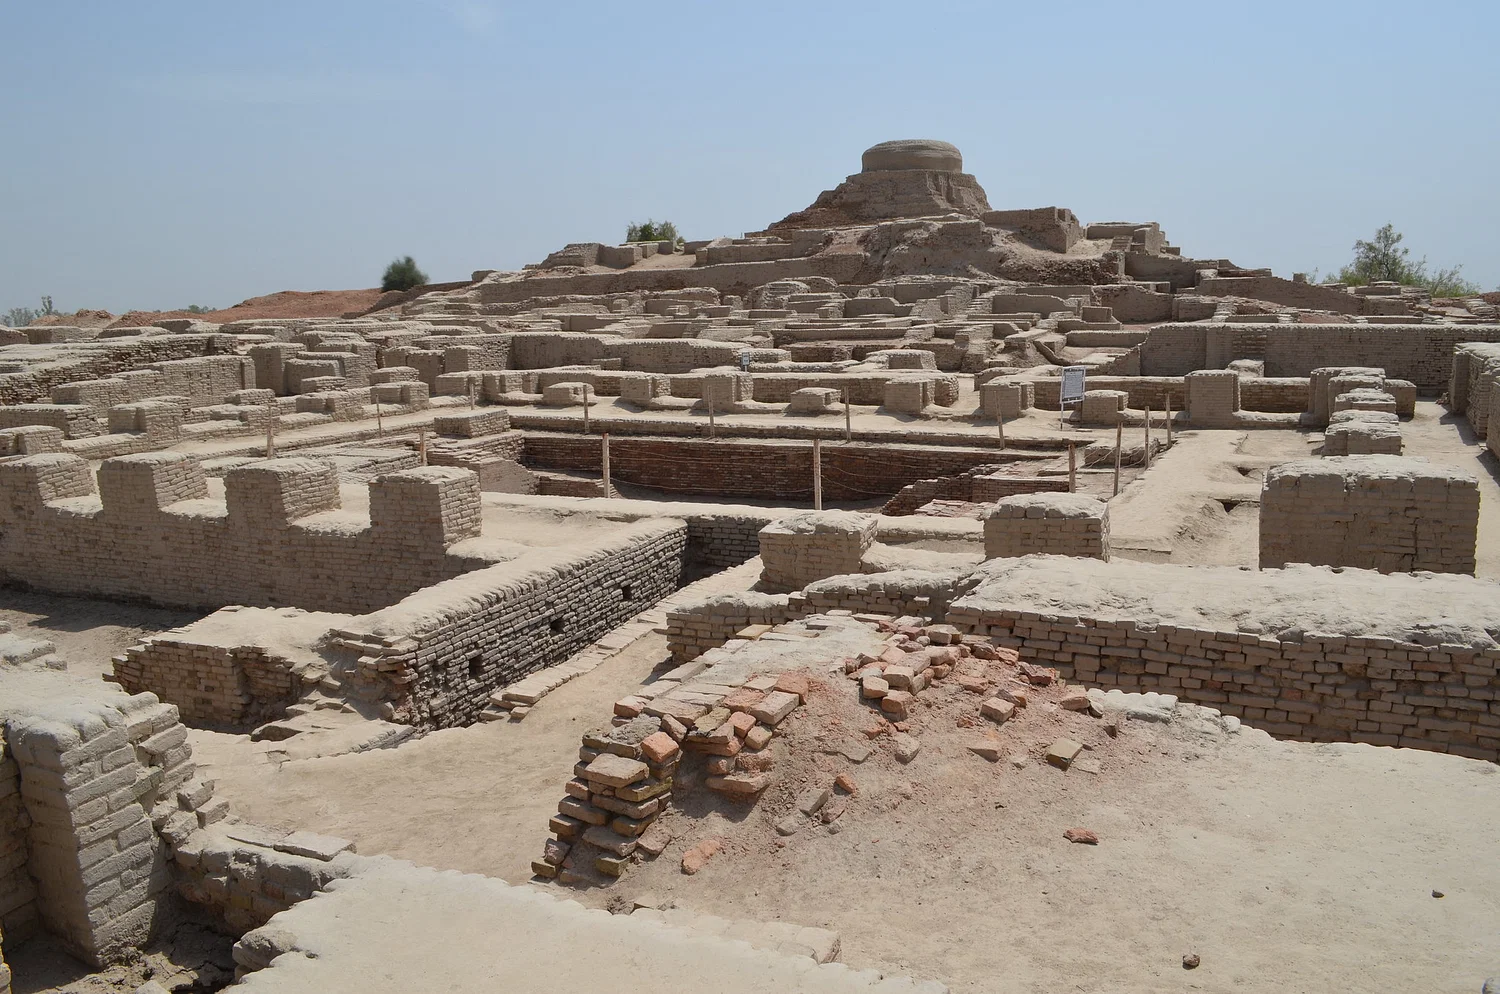 What did India export during Indus valley civilization?